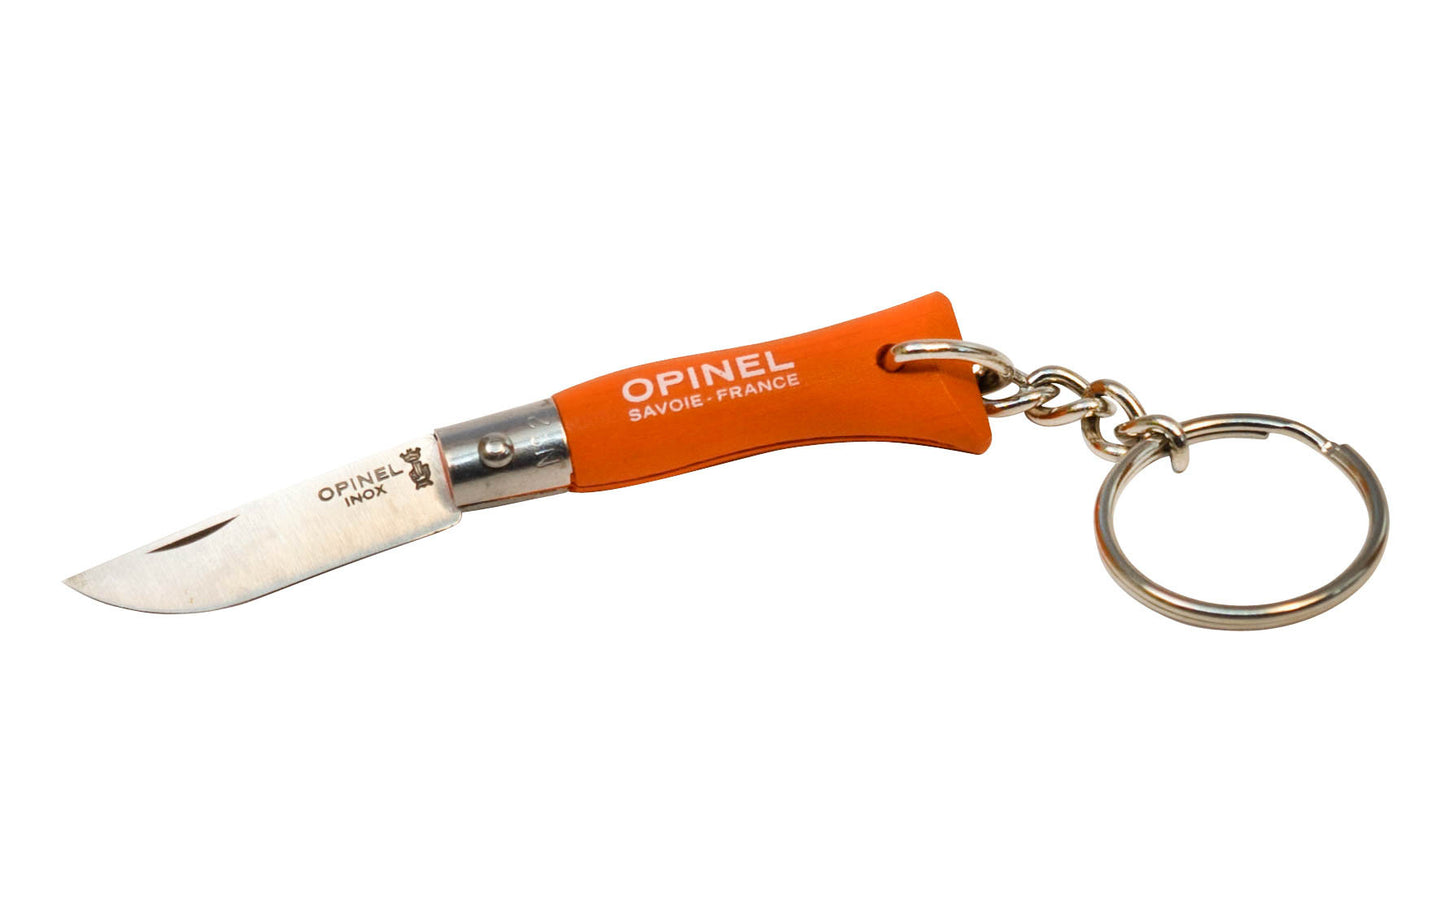 Opinel Mini Stainless Steel Knife with Keychain ~ "Tangerine" Color ~ Mini No. 2 stainless model ~ Foldable blade ~ Made of 12c27 Sandvik stainless steel~ Painted beechwood handle ~ Sturdy keychain & ring attached